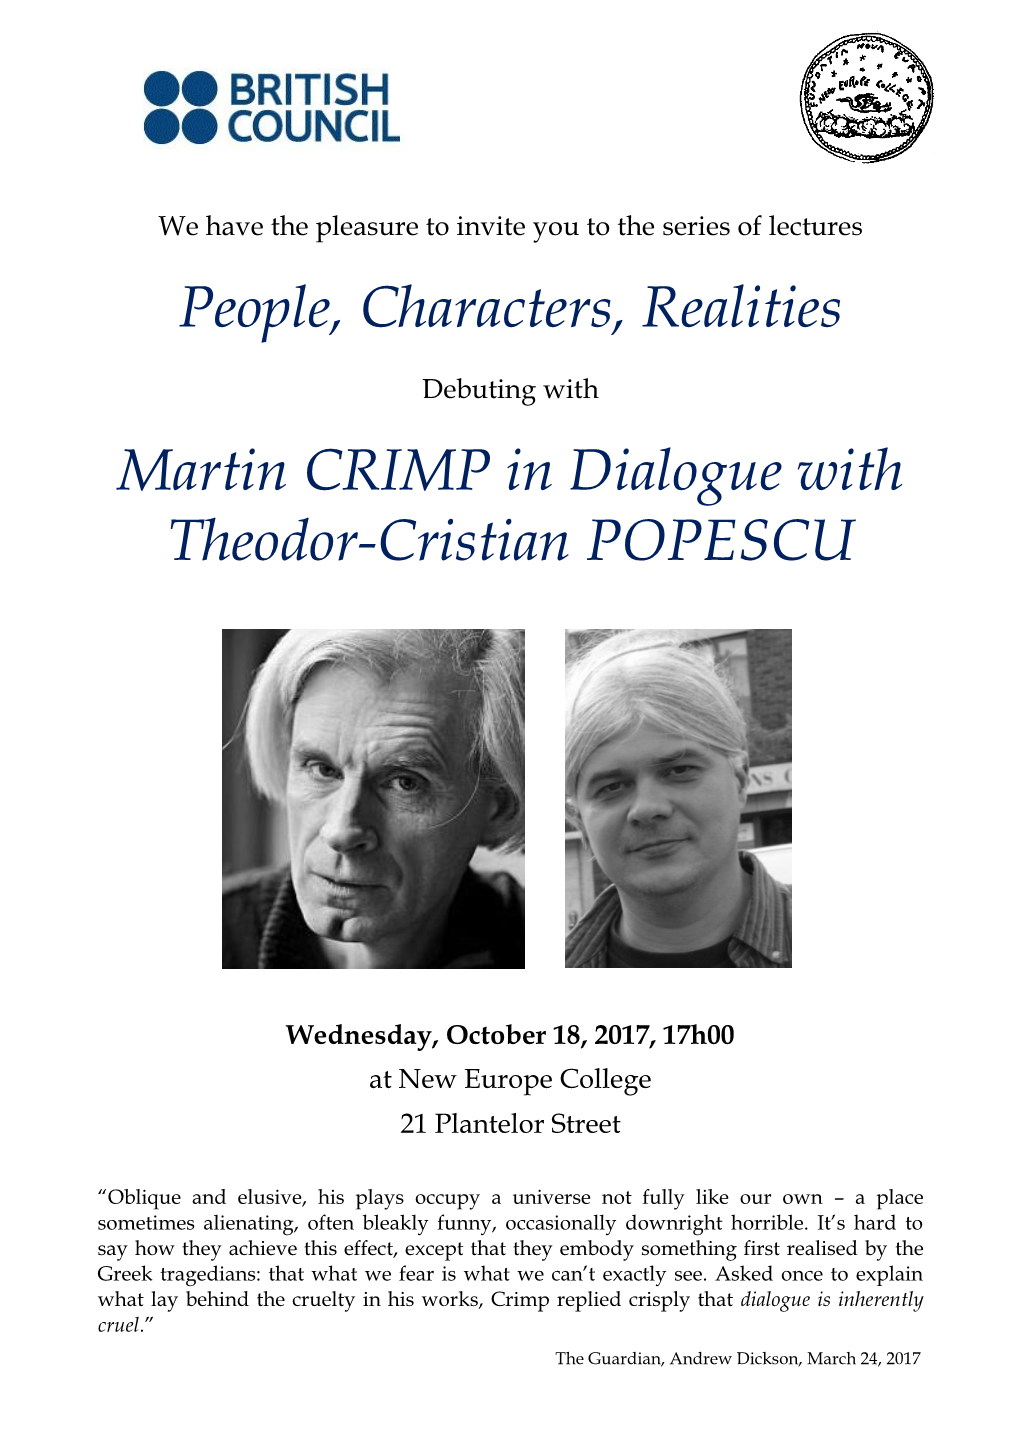 People, Characters, Realities Martin CRIMP in Dialogue with Theodor